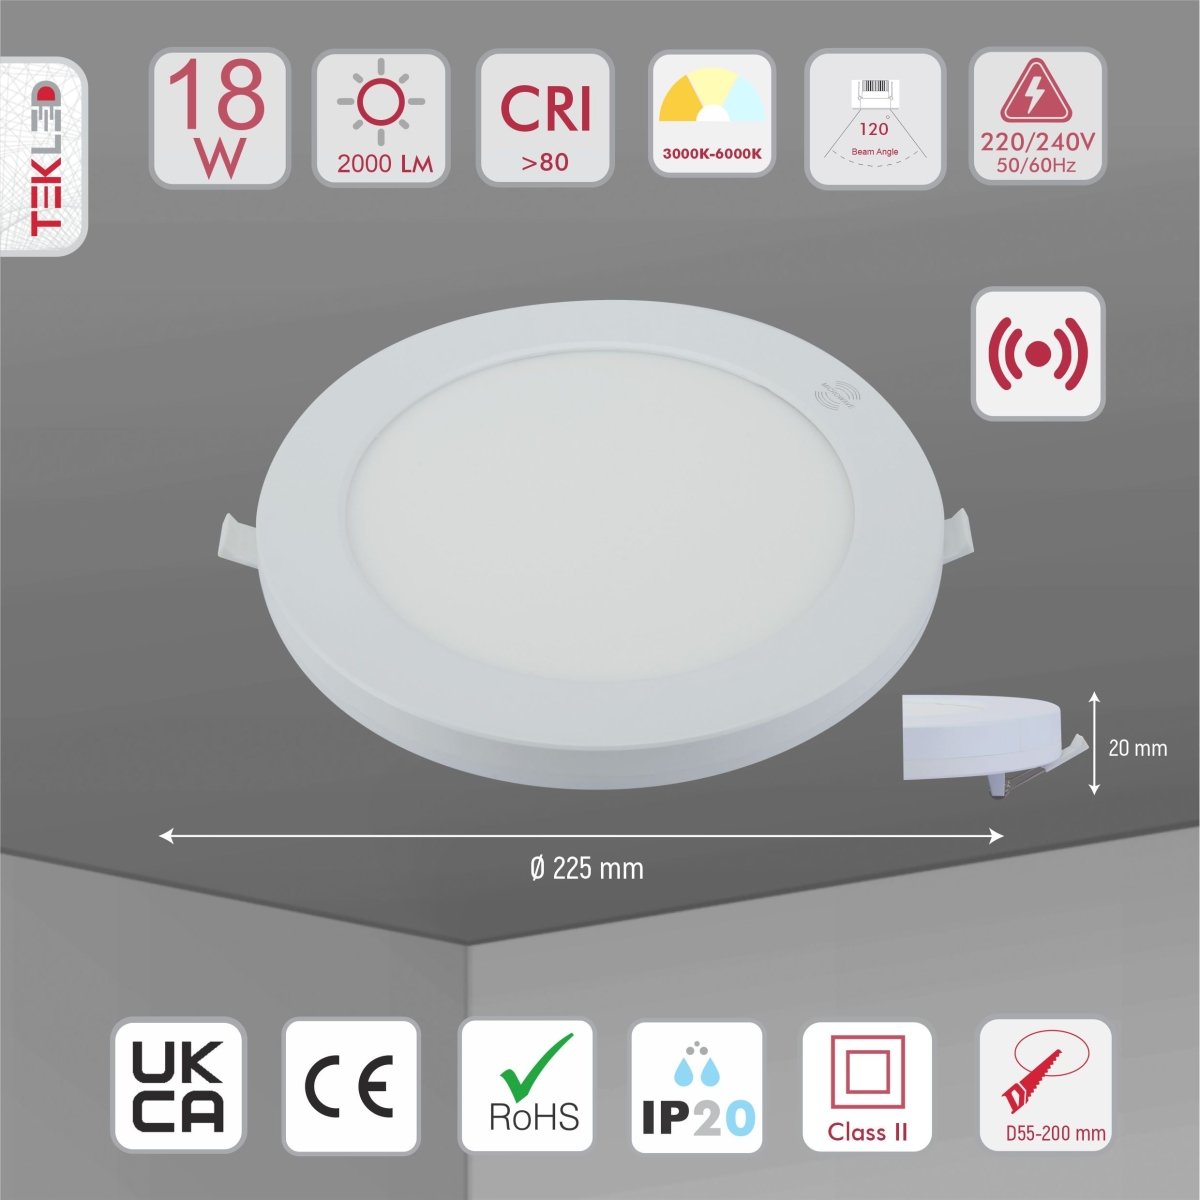 Product dimensions of universal downlight led round panel light 18w 3000-6000k warm white cool daylight